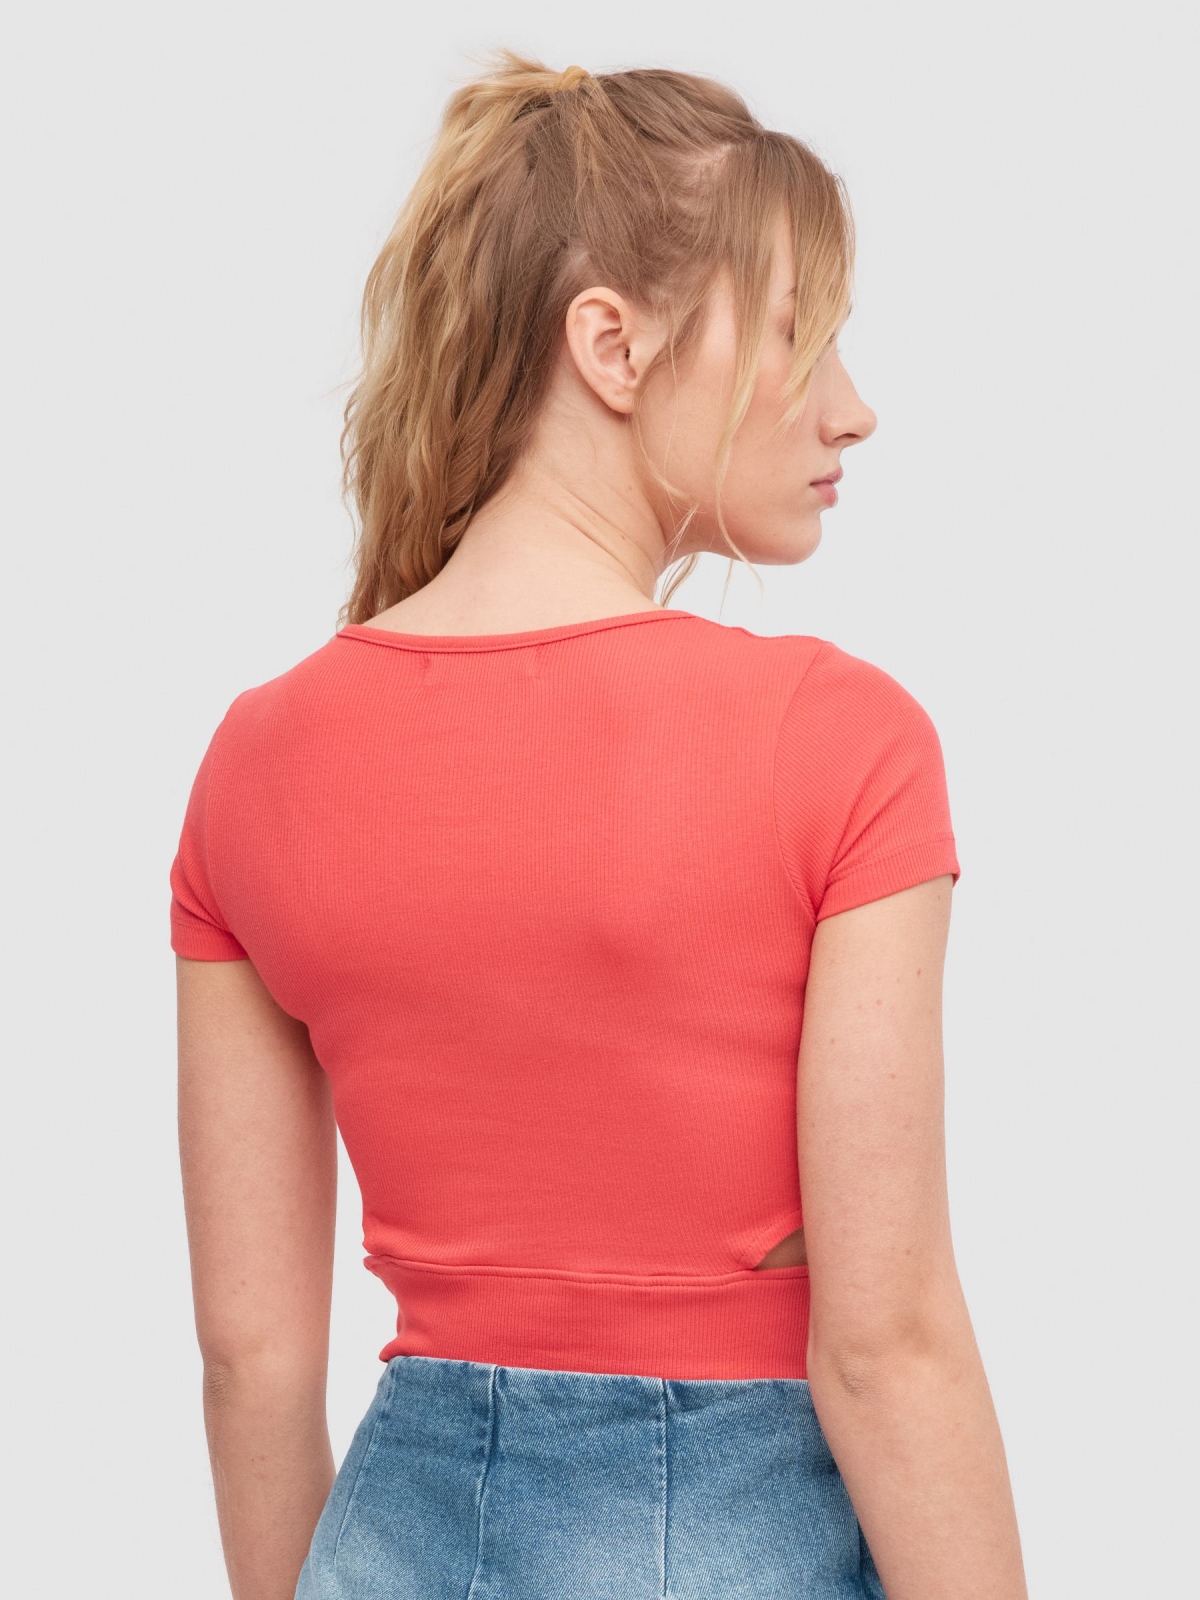 Cut out crop top red middle back view